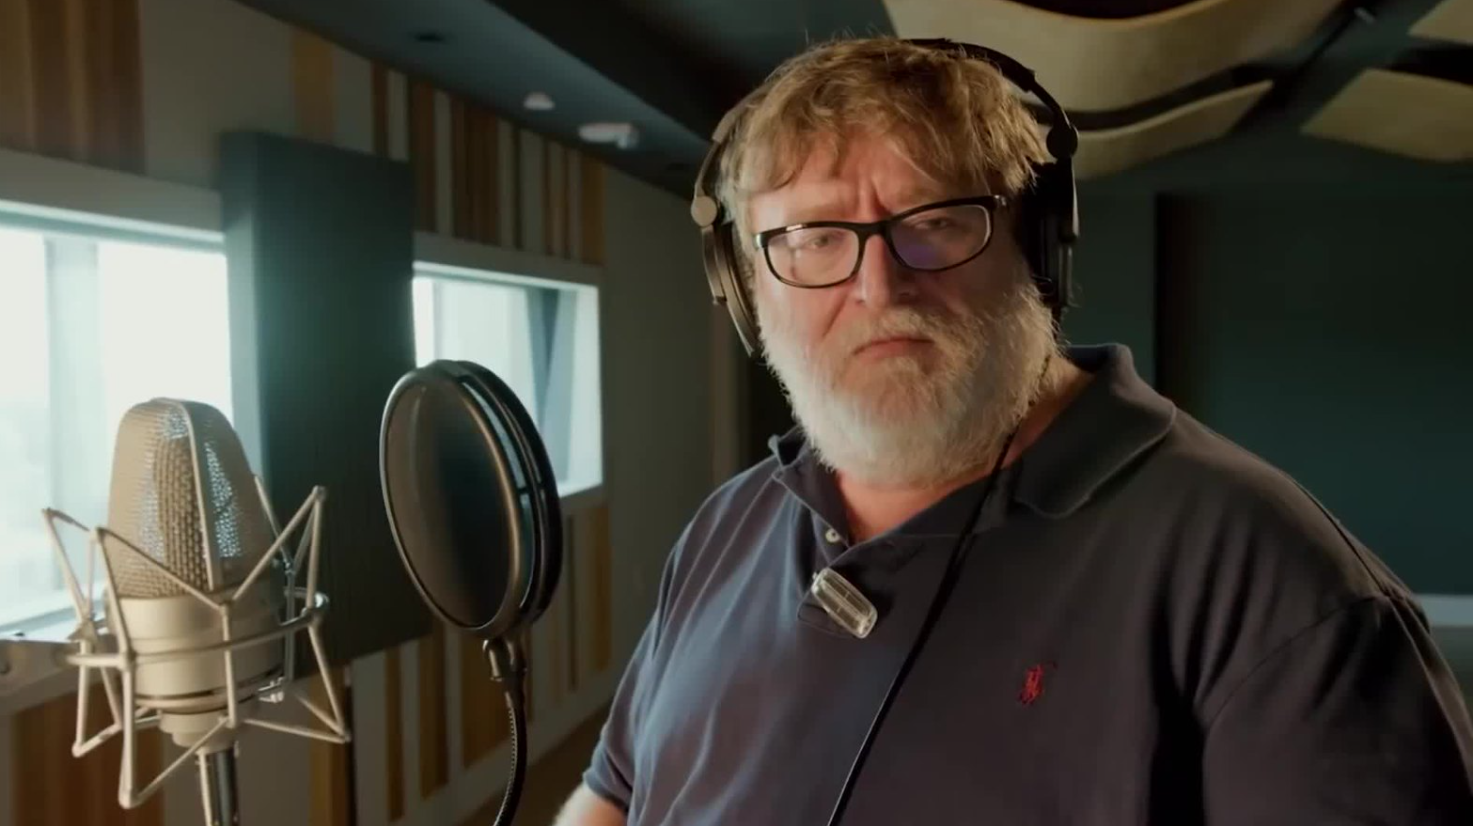 Gabe Newell in a recording studio, standing next to a microphone.